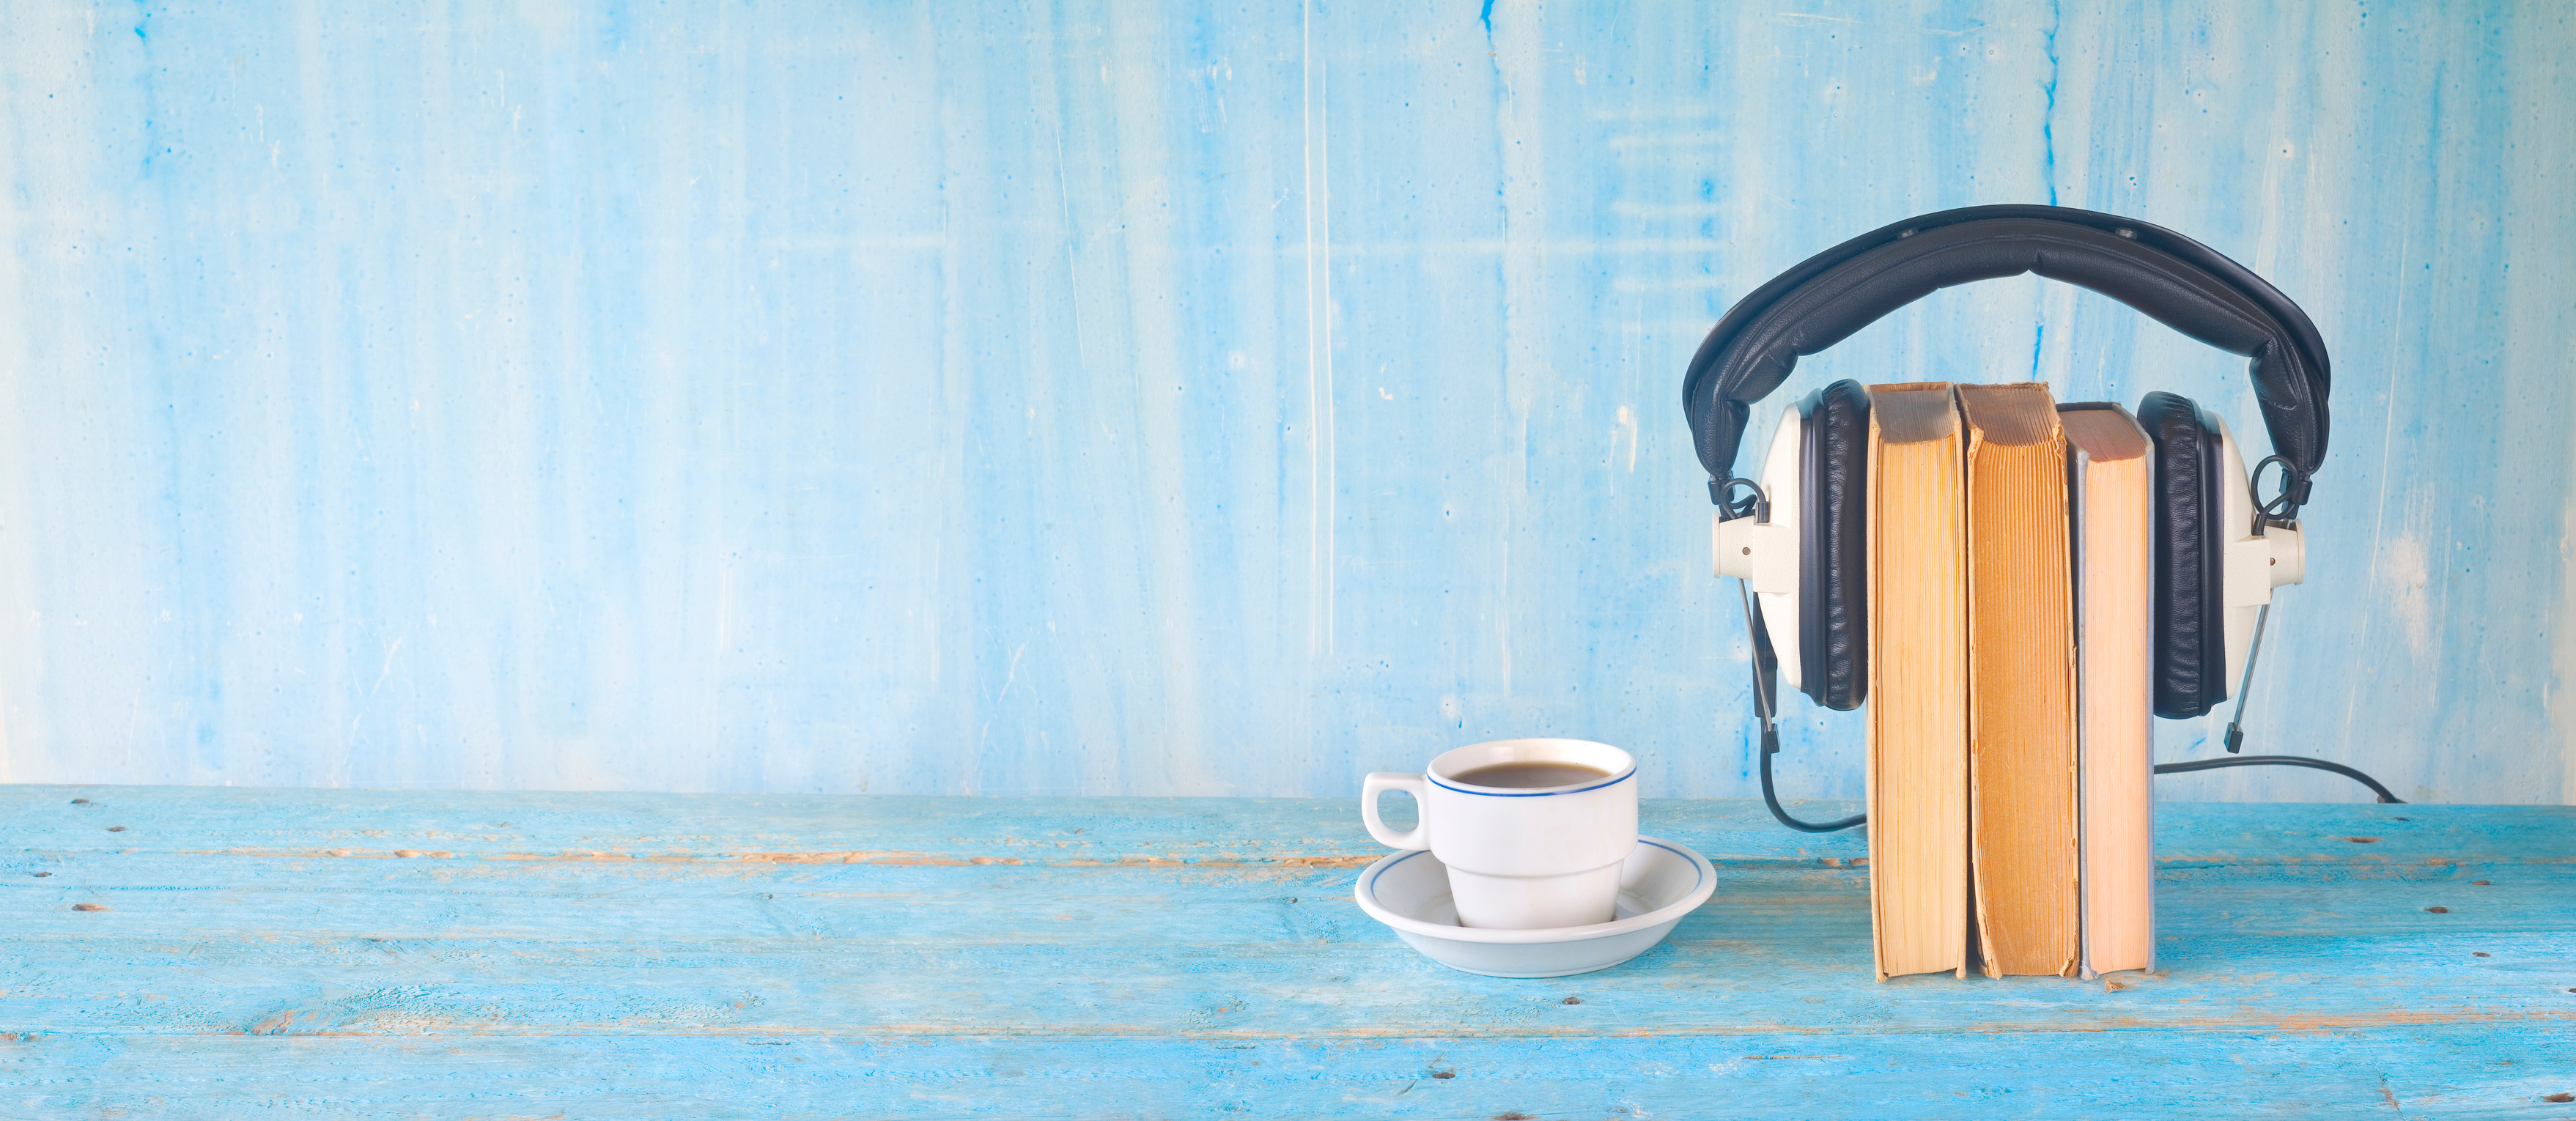 audio book concept, with book, headphones and coffee